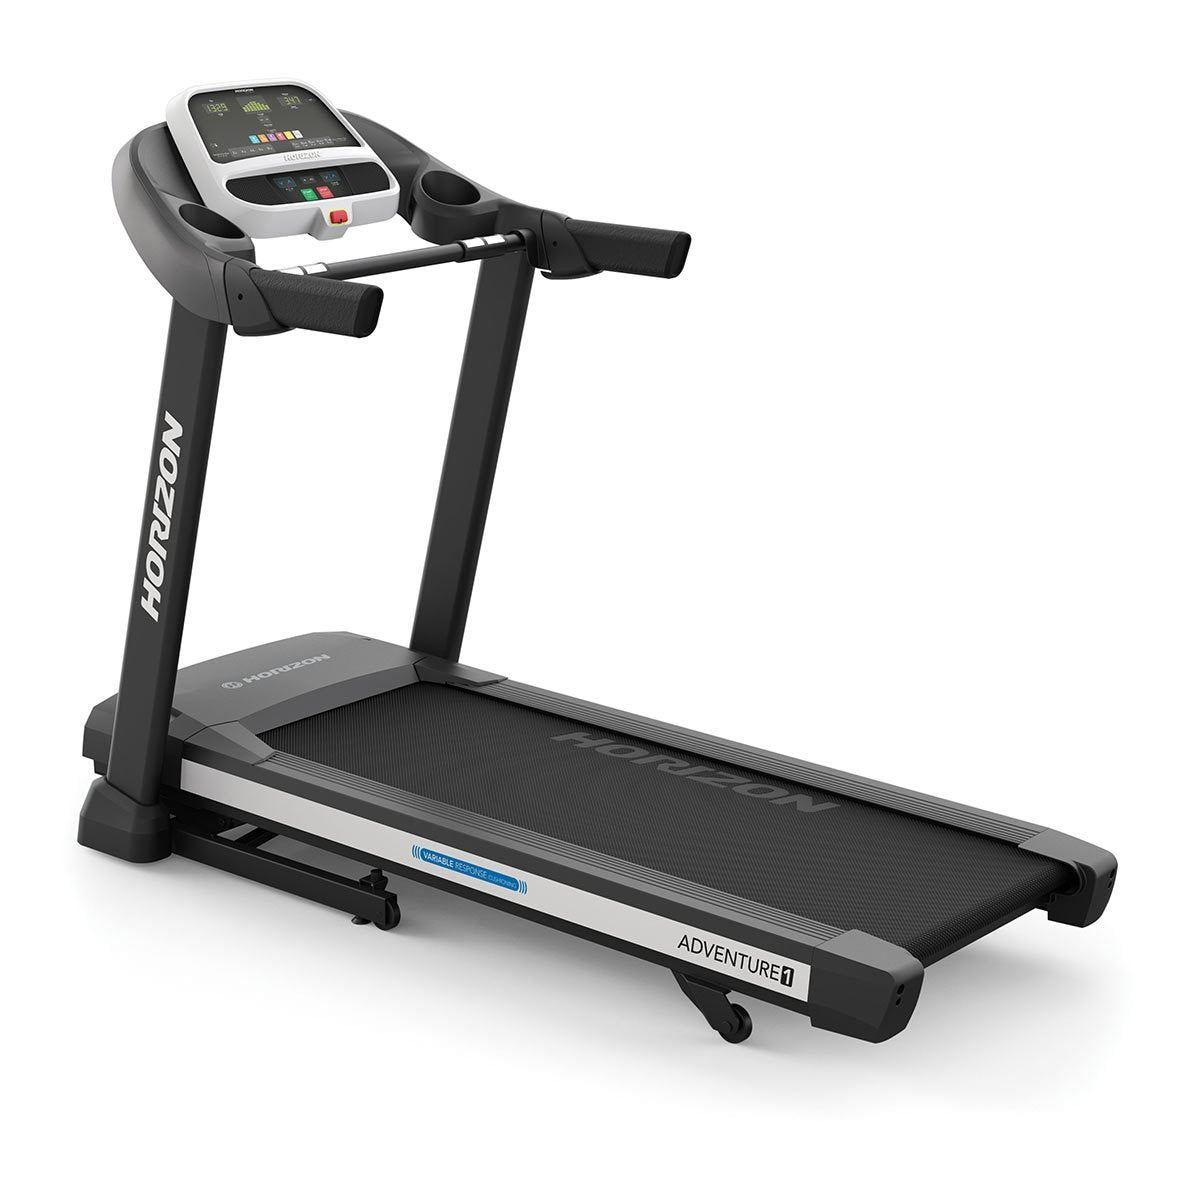 Horizon Fitness Adventure 1 Treadmill - Delivery Only - Signature Retail Stores